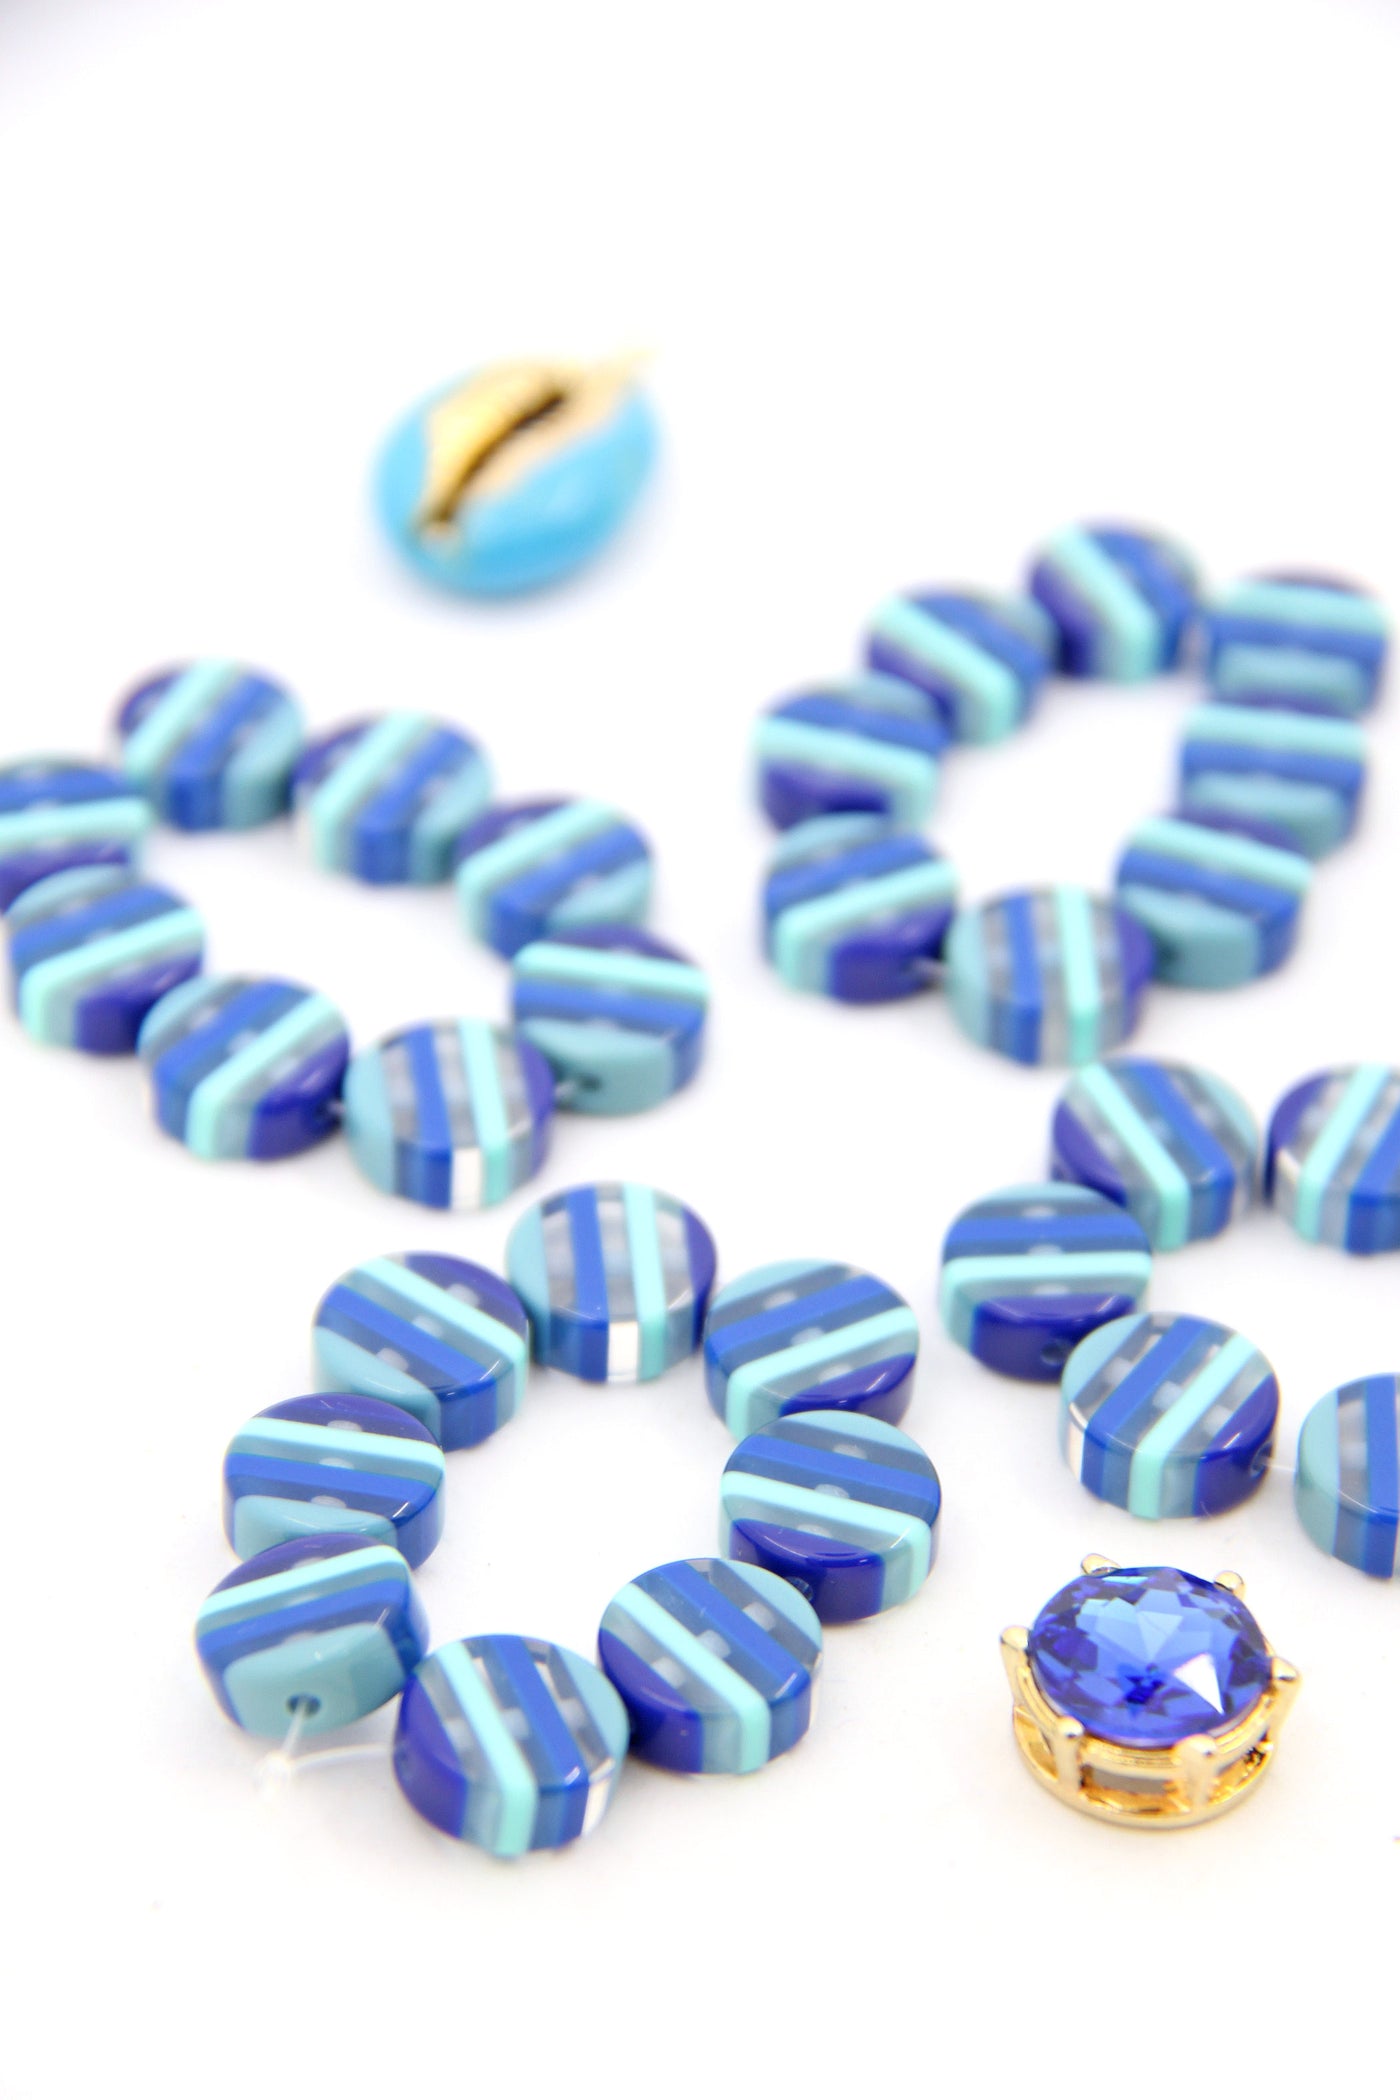 Retro Style Blue Striped Italian Poly Resin Coin, 12mm, 8 Beads